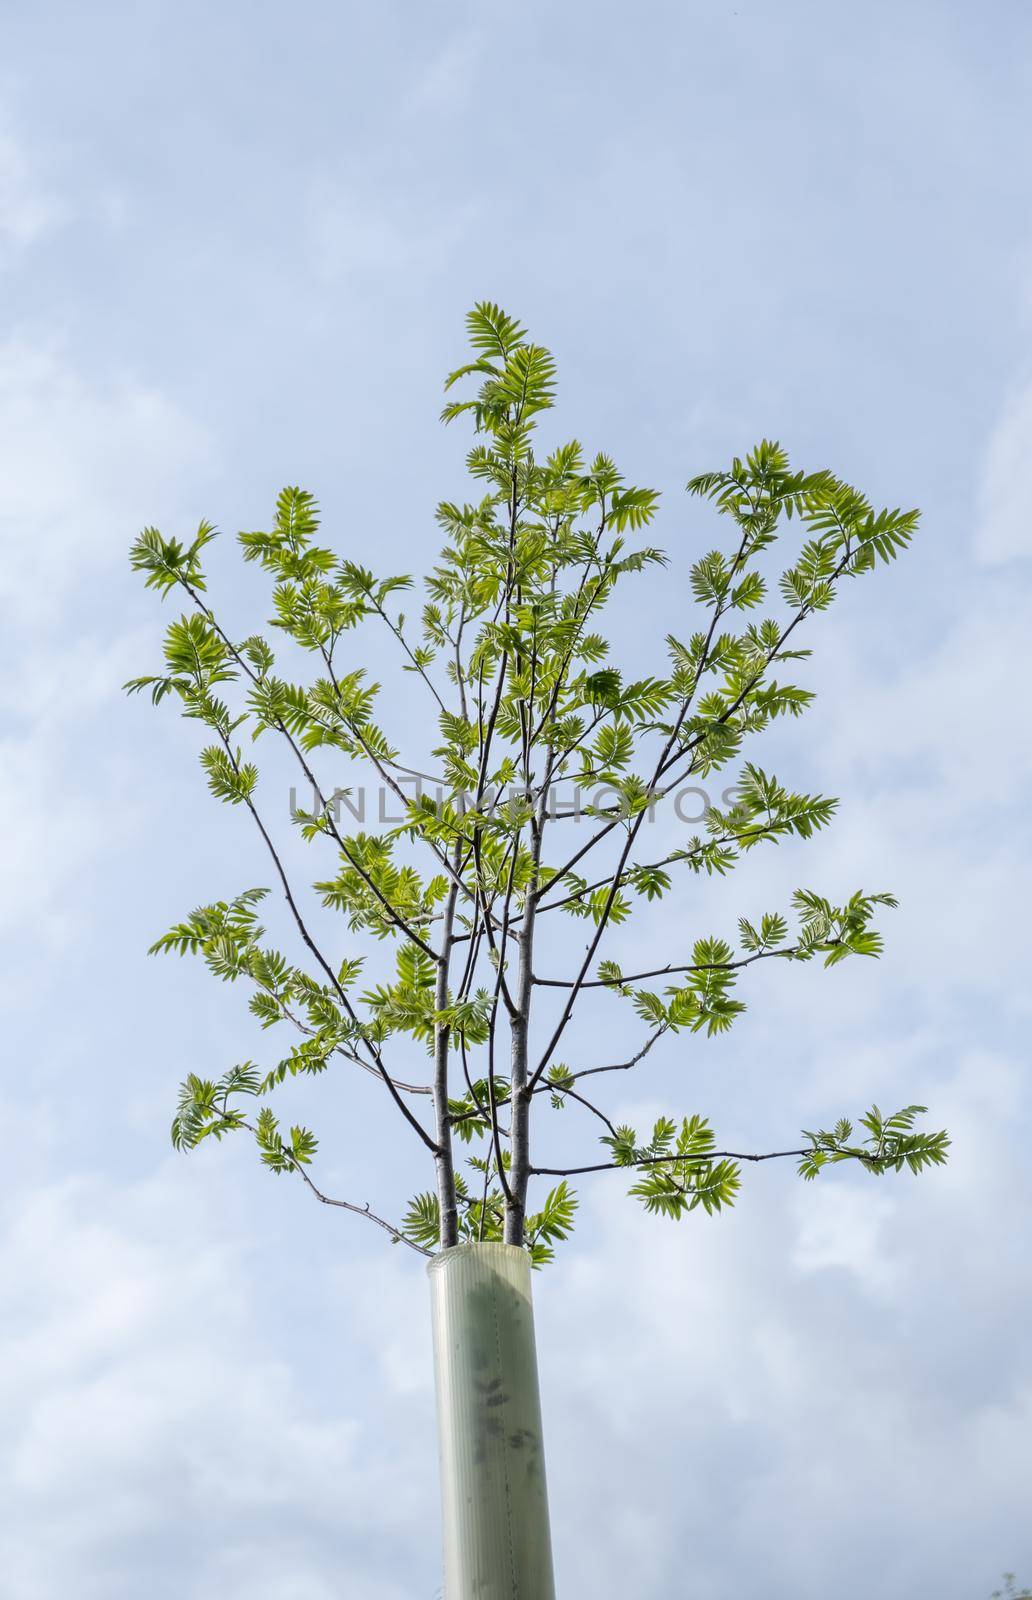 A Sapling Inside A Plastic Tree Shelter (Or Tree Guard Or Tree Protector) Against A Bright Spring Sky